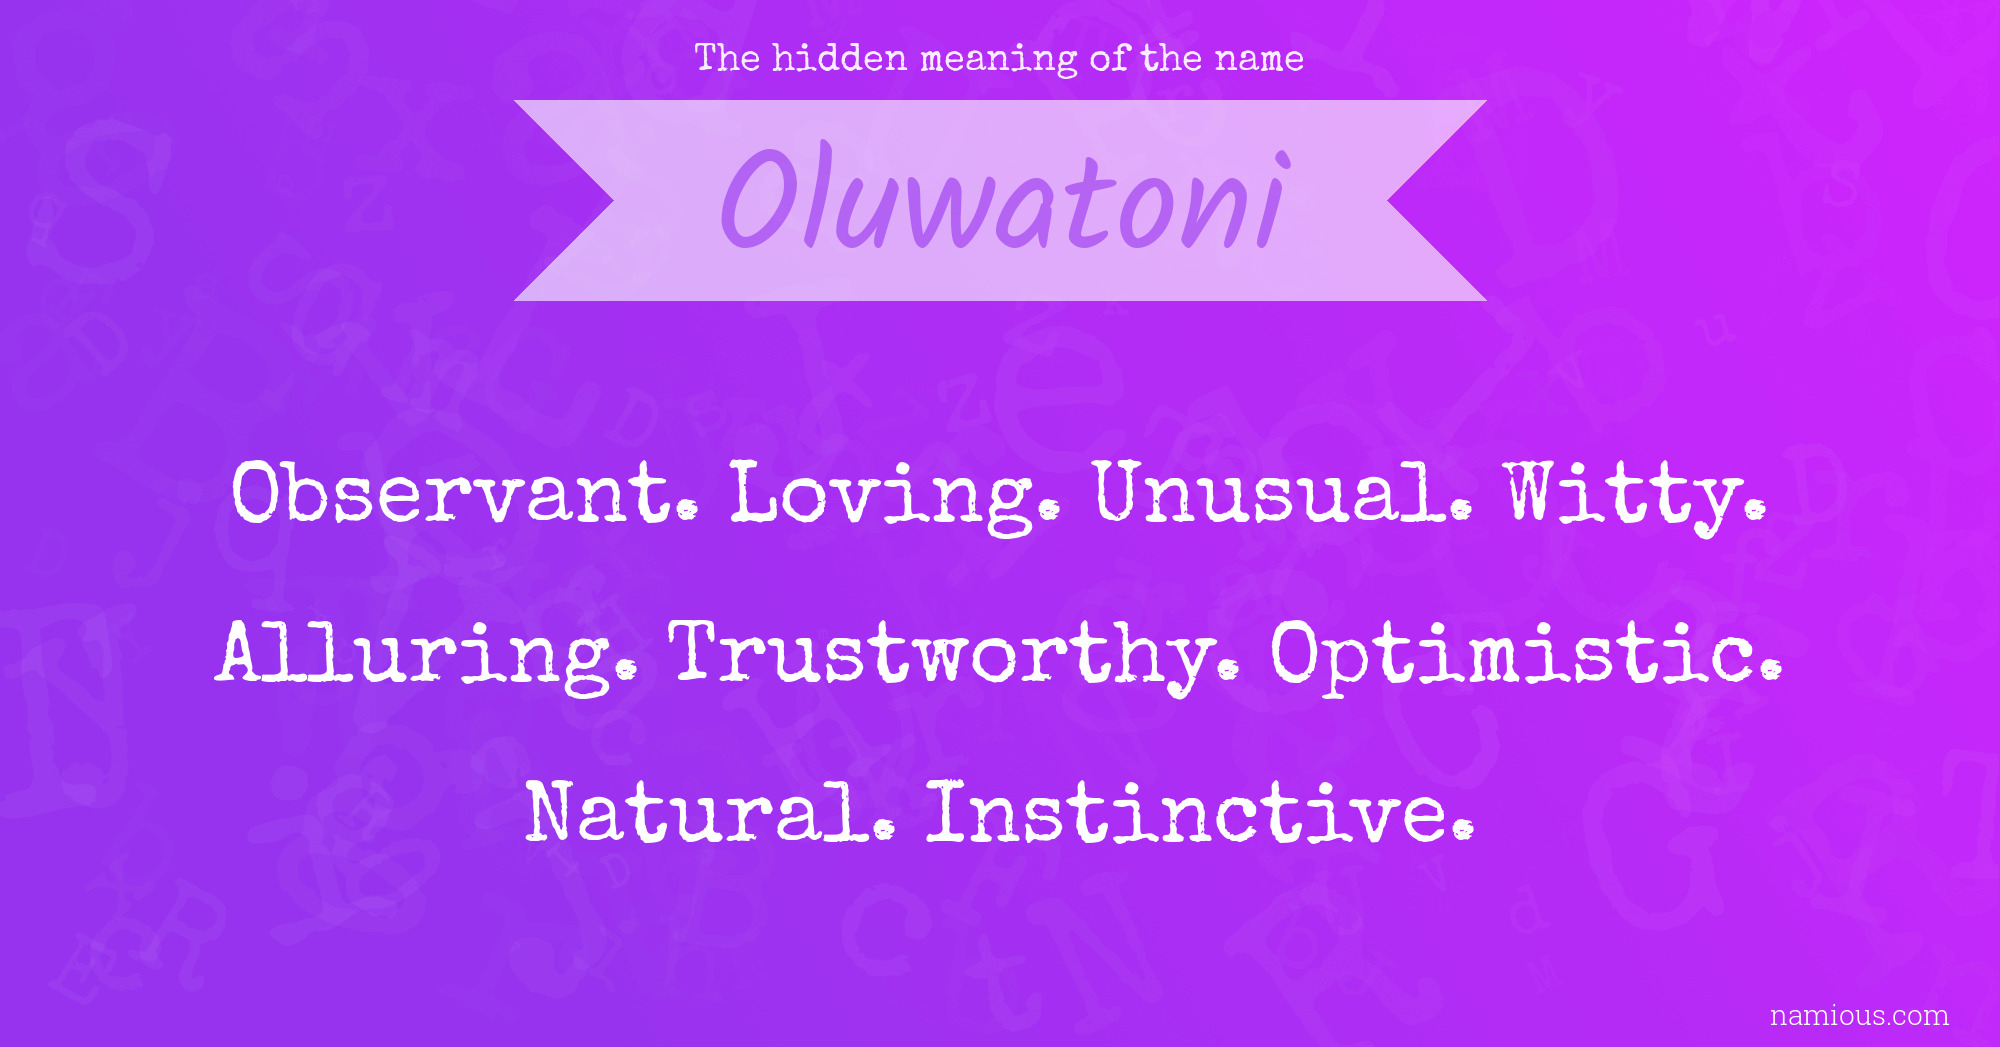 The hidden meaning of the name Oluwatoni